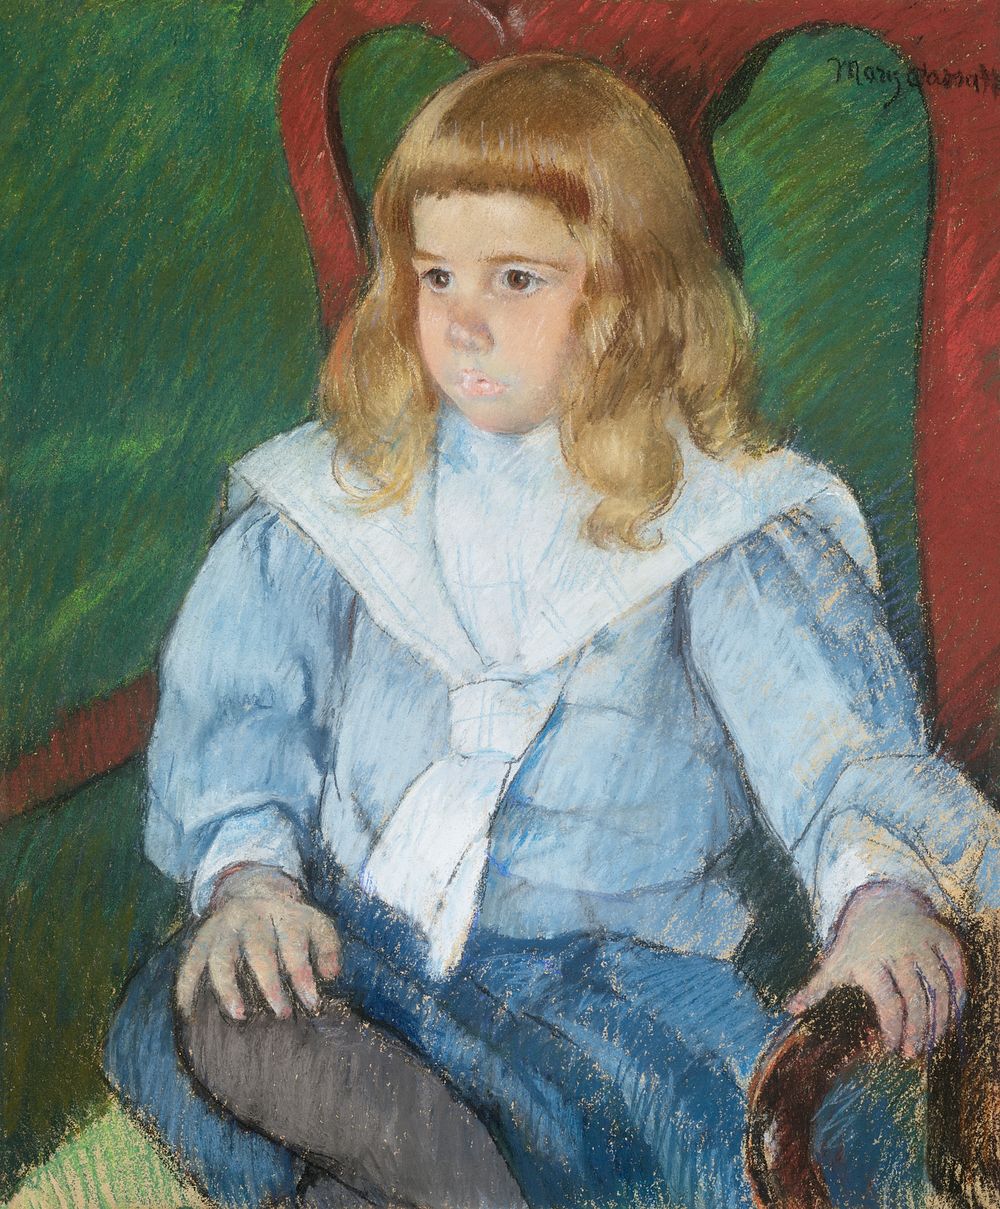 Boy with Golden Curls (1918) by Mary Cassatt. Original portrait painting from The Art Institute of Chicago. Digitally…